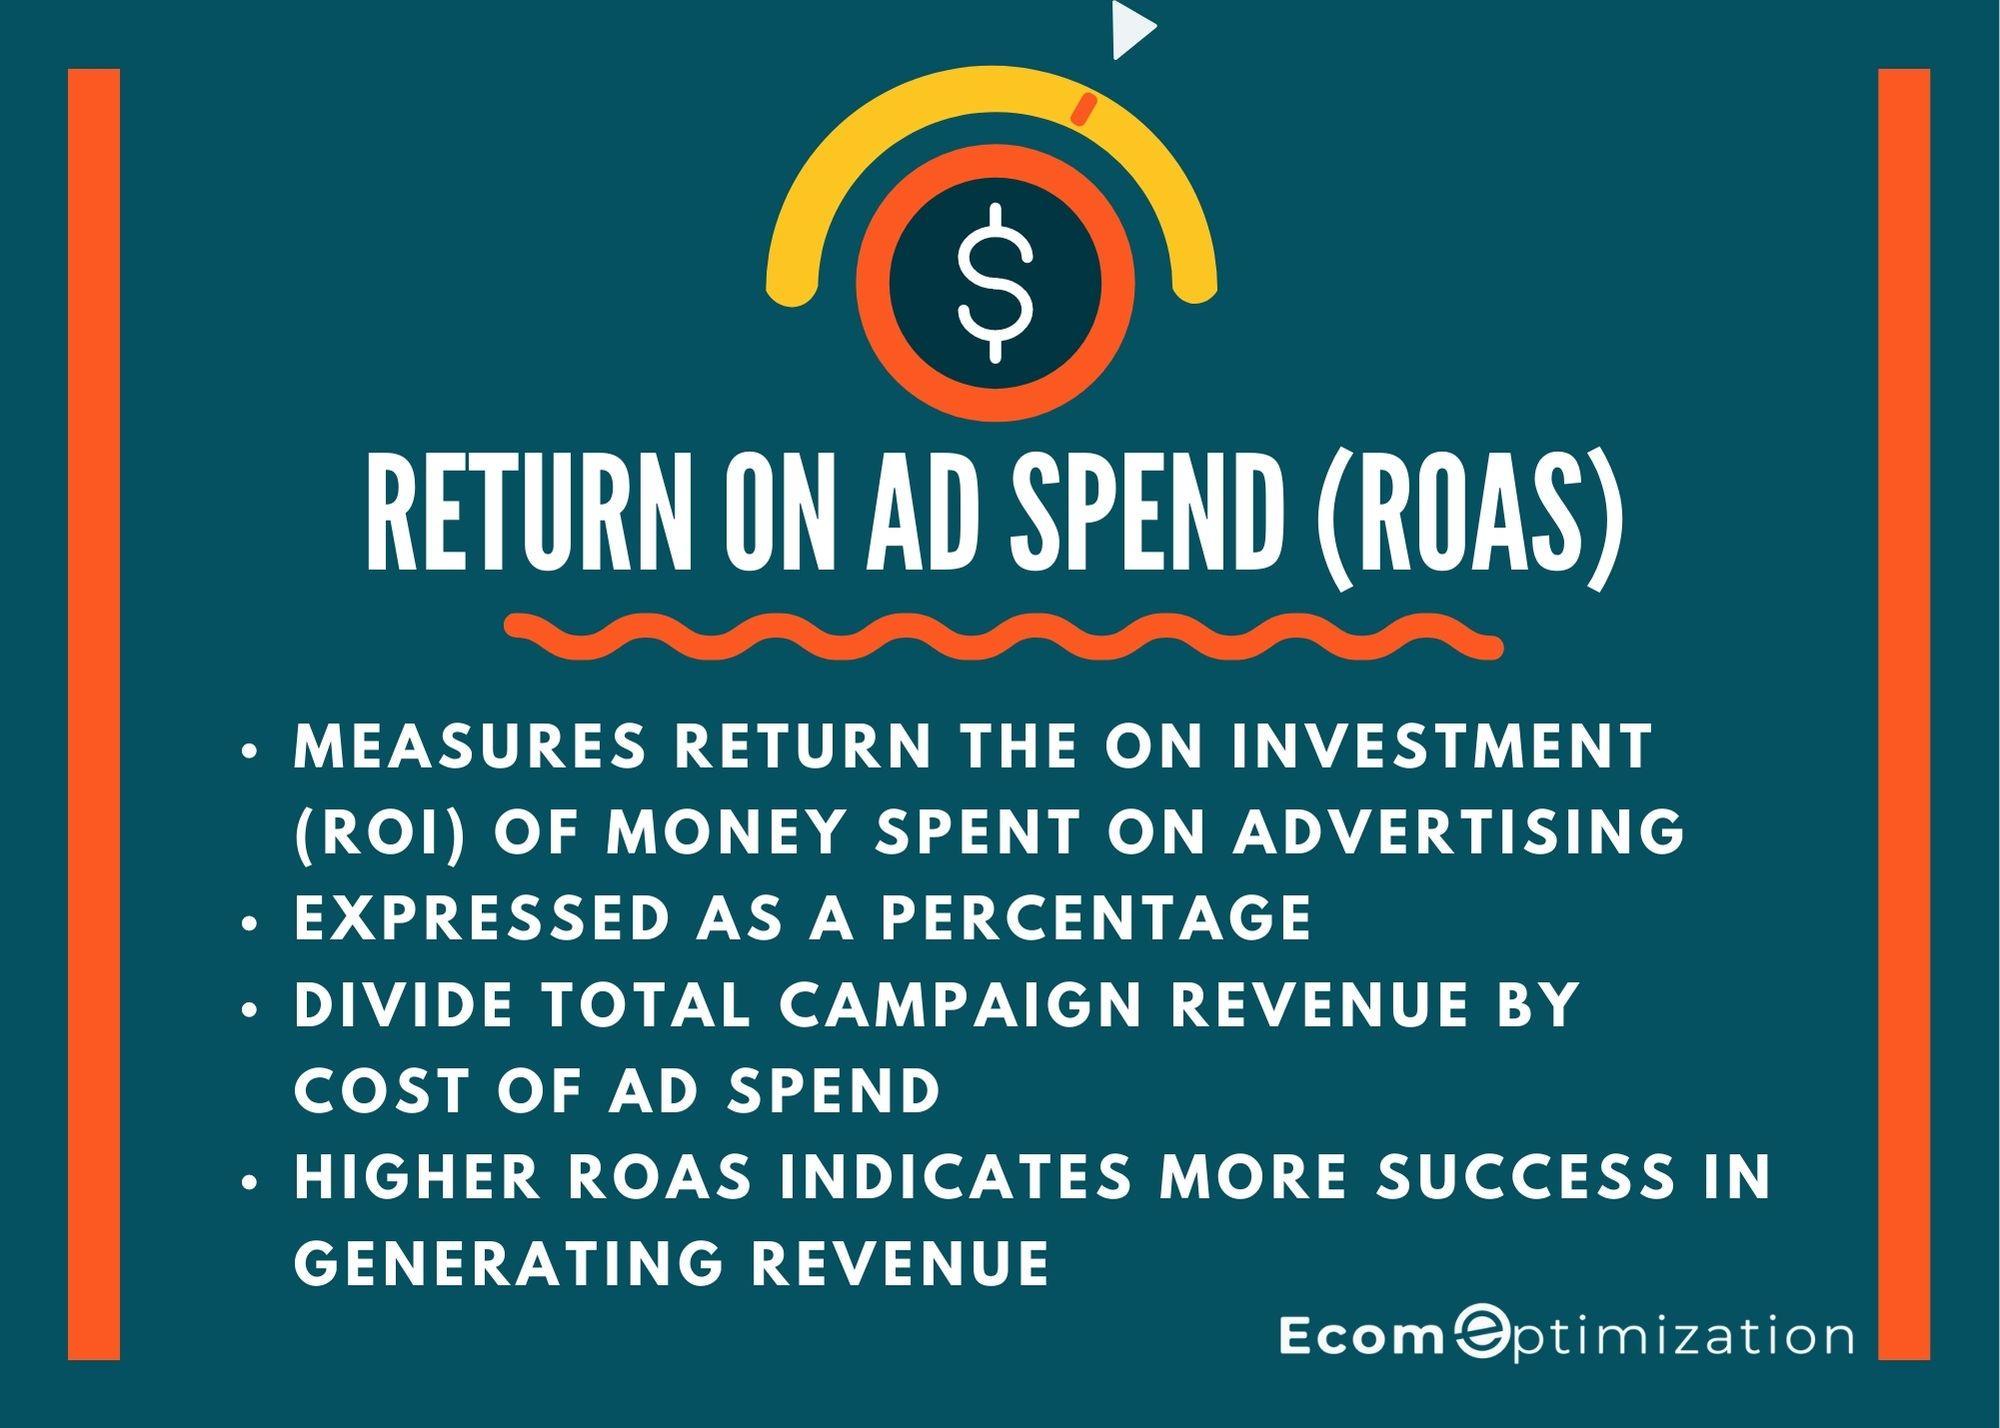 Return on Ad Spend (ROAS) for Amazon Infographic